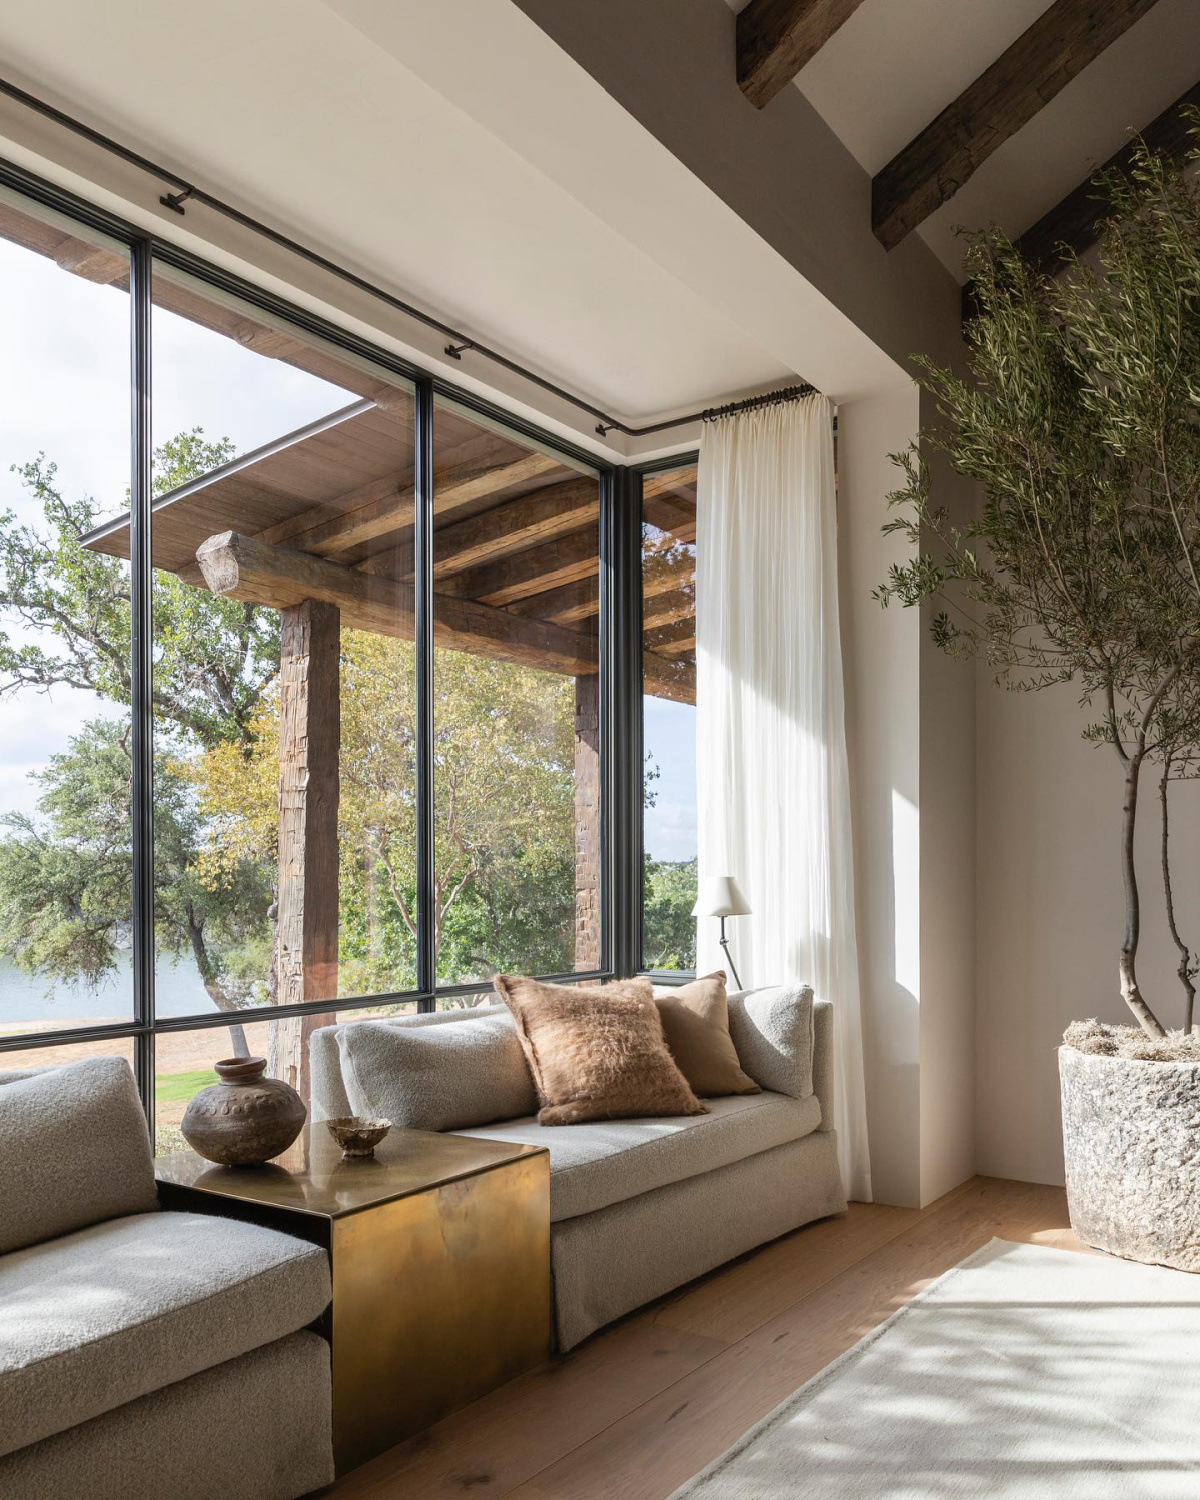 Belgian minimal modern style in a lakehouse with design by Marie Flanigan. Photo: Julie Soefer